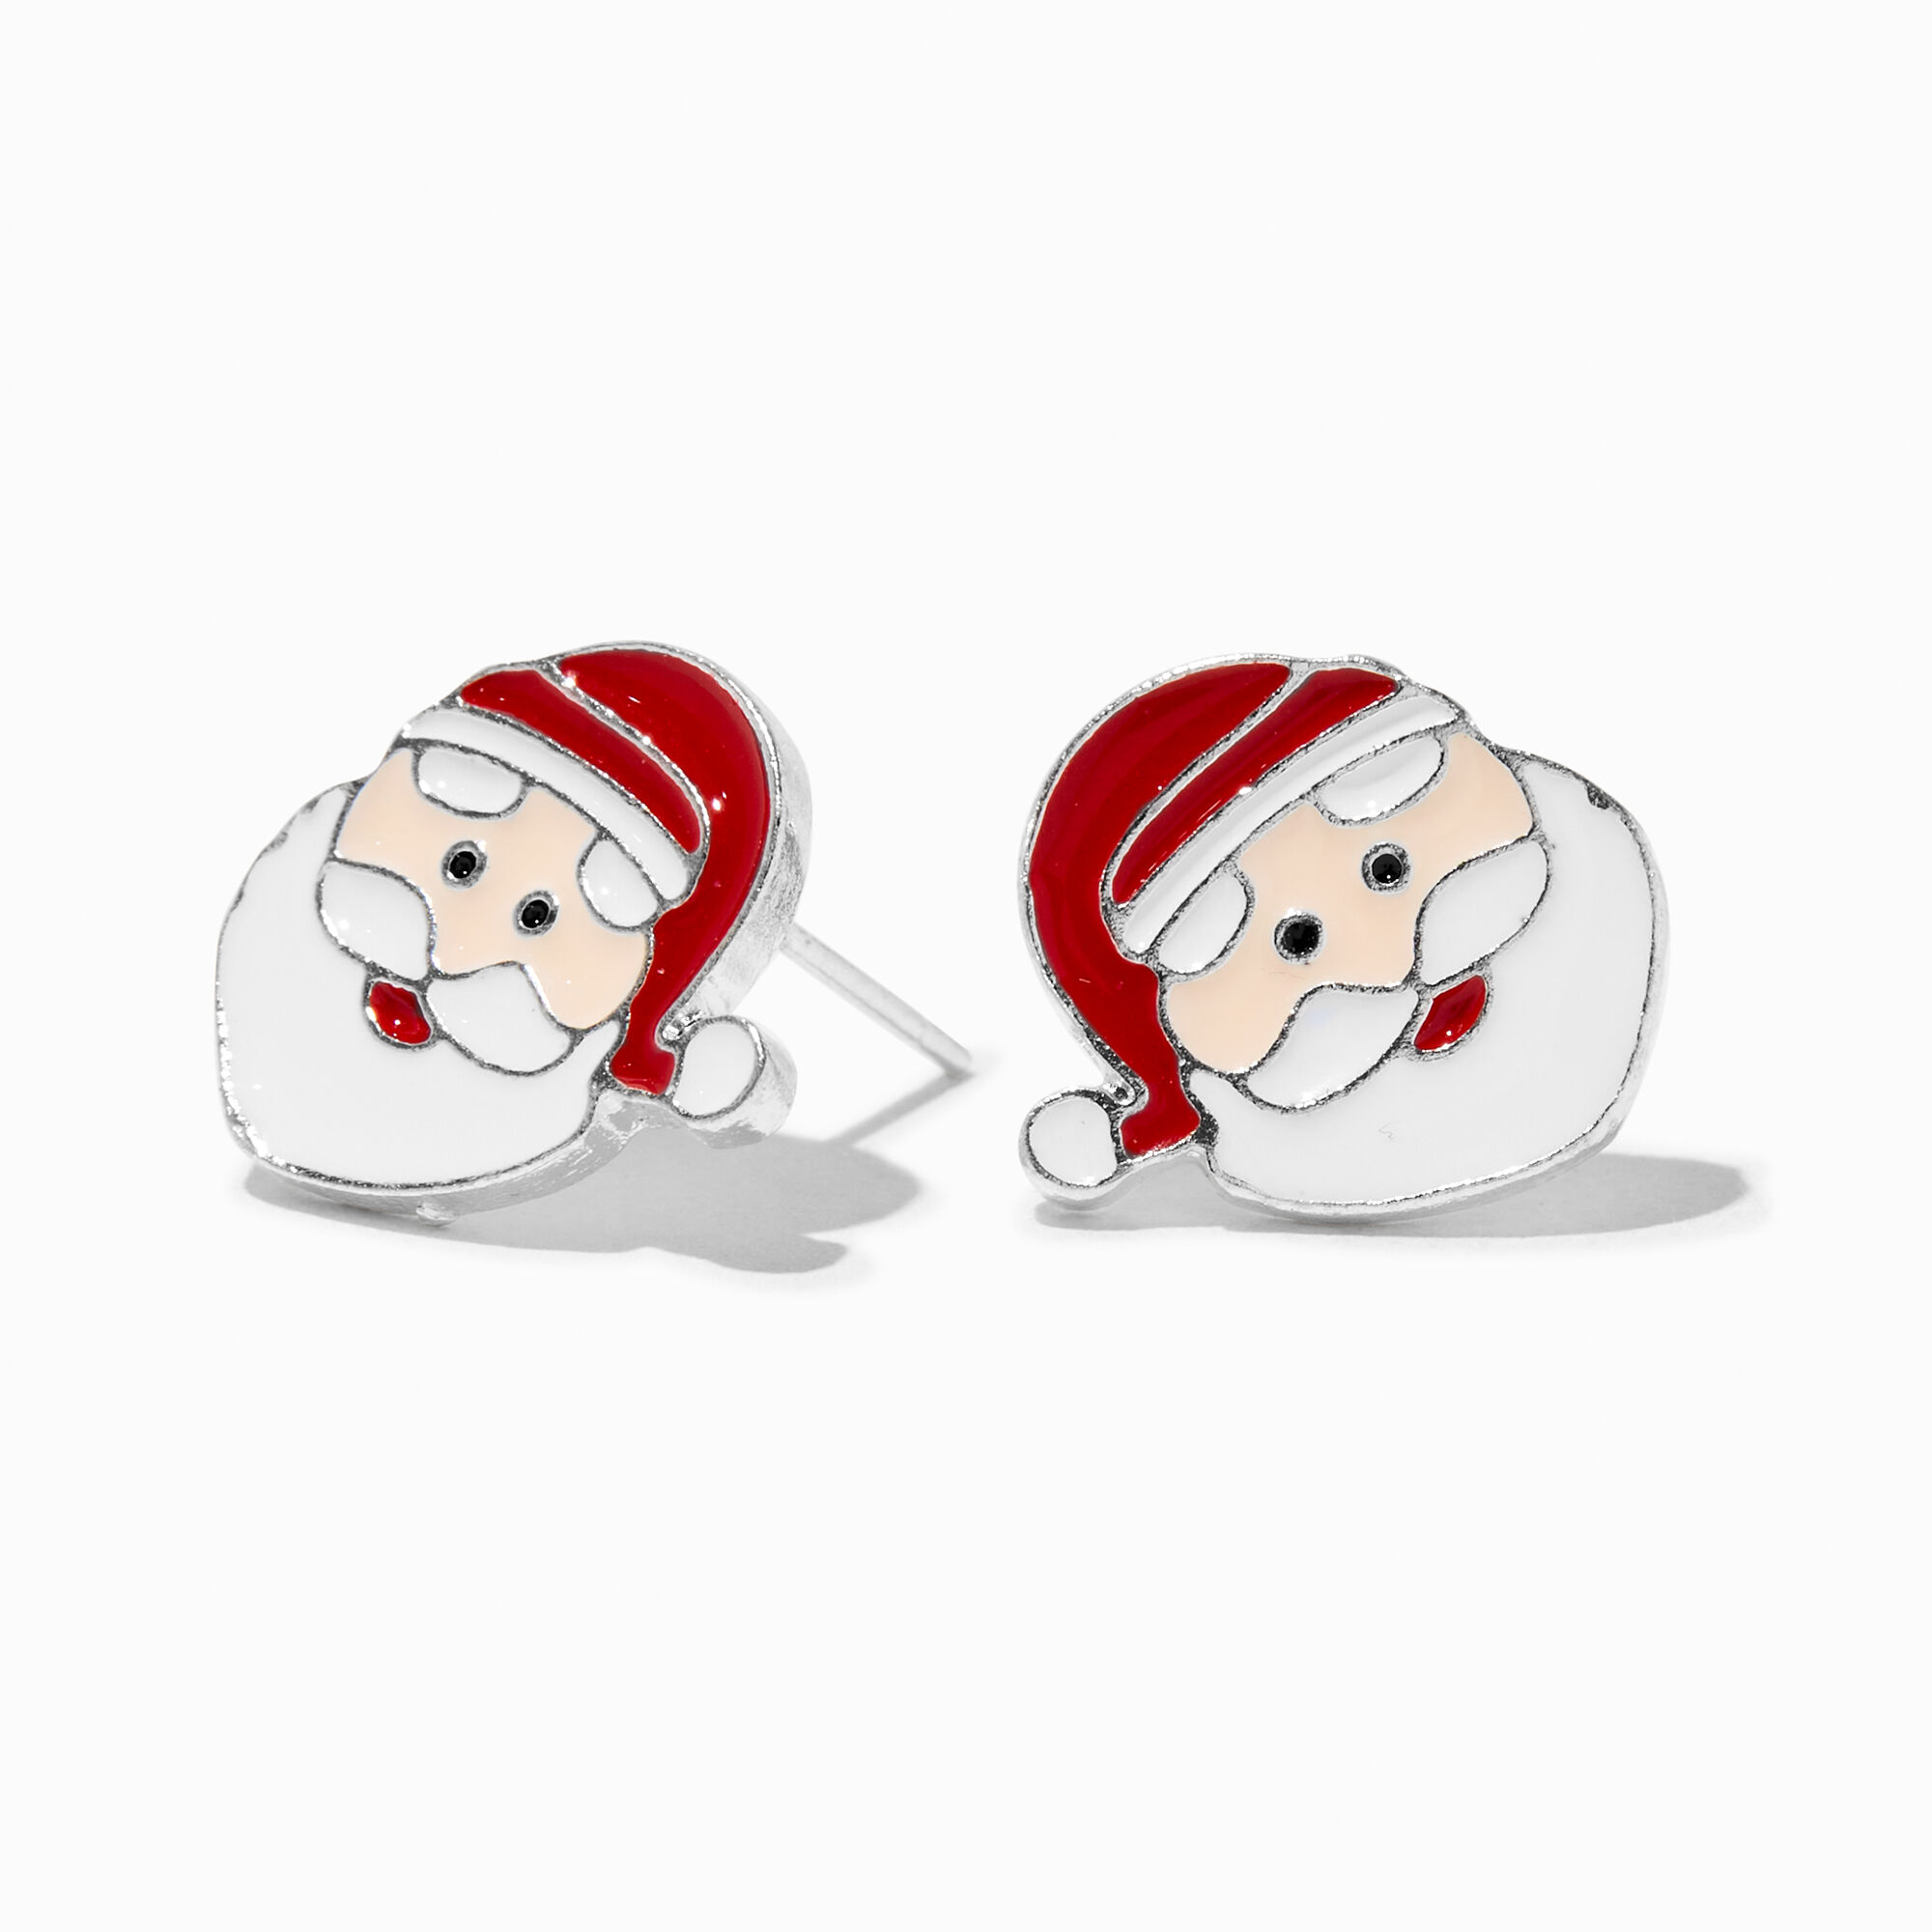 View Claires Santa Claus Face Enameled Stud Earrings Silver information